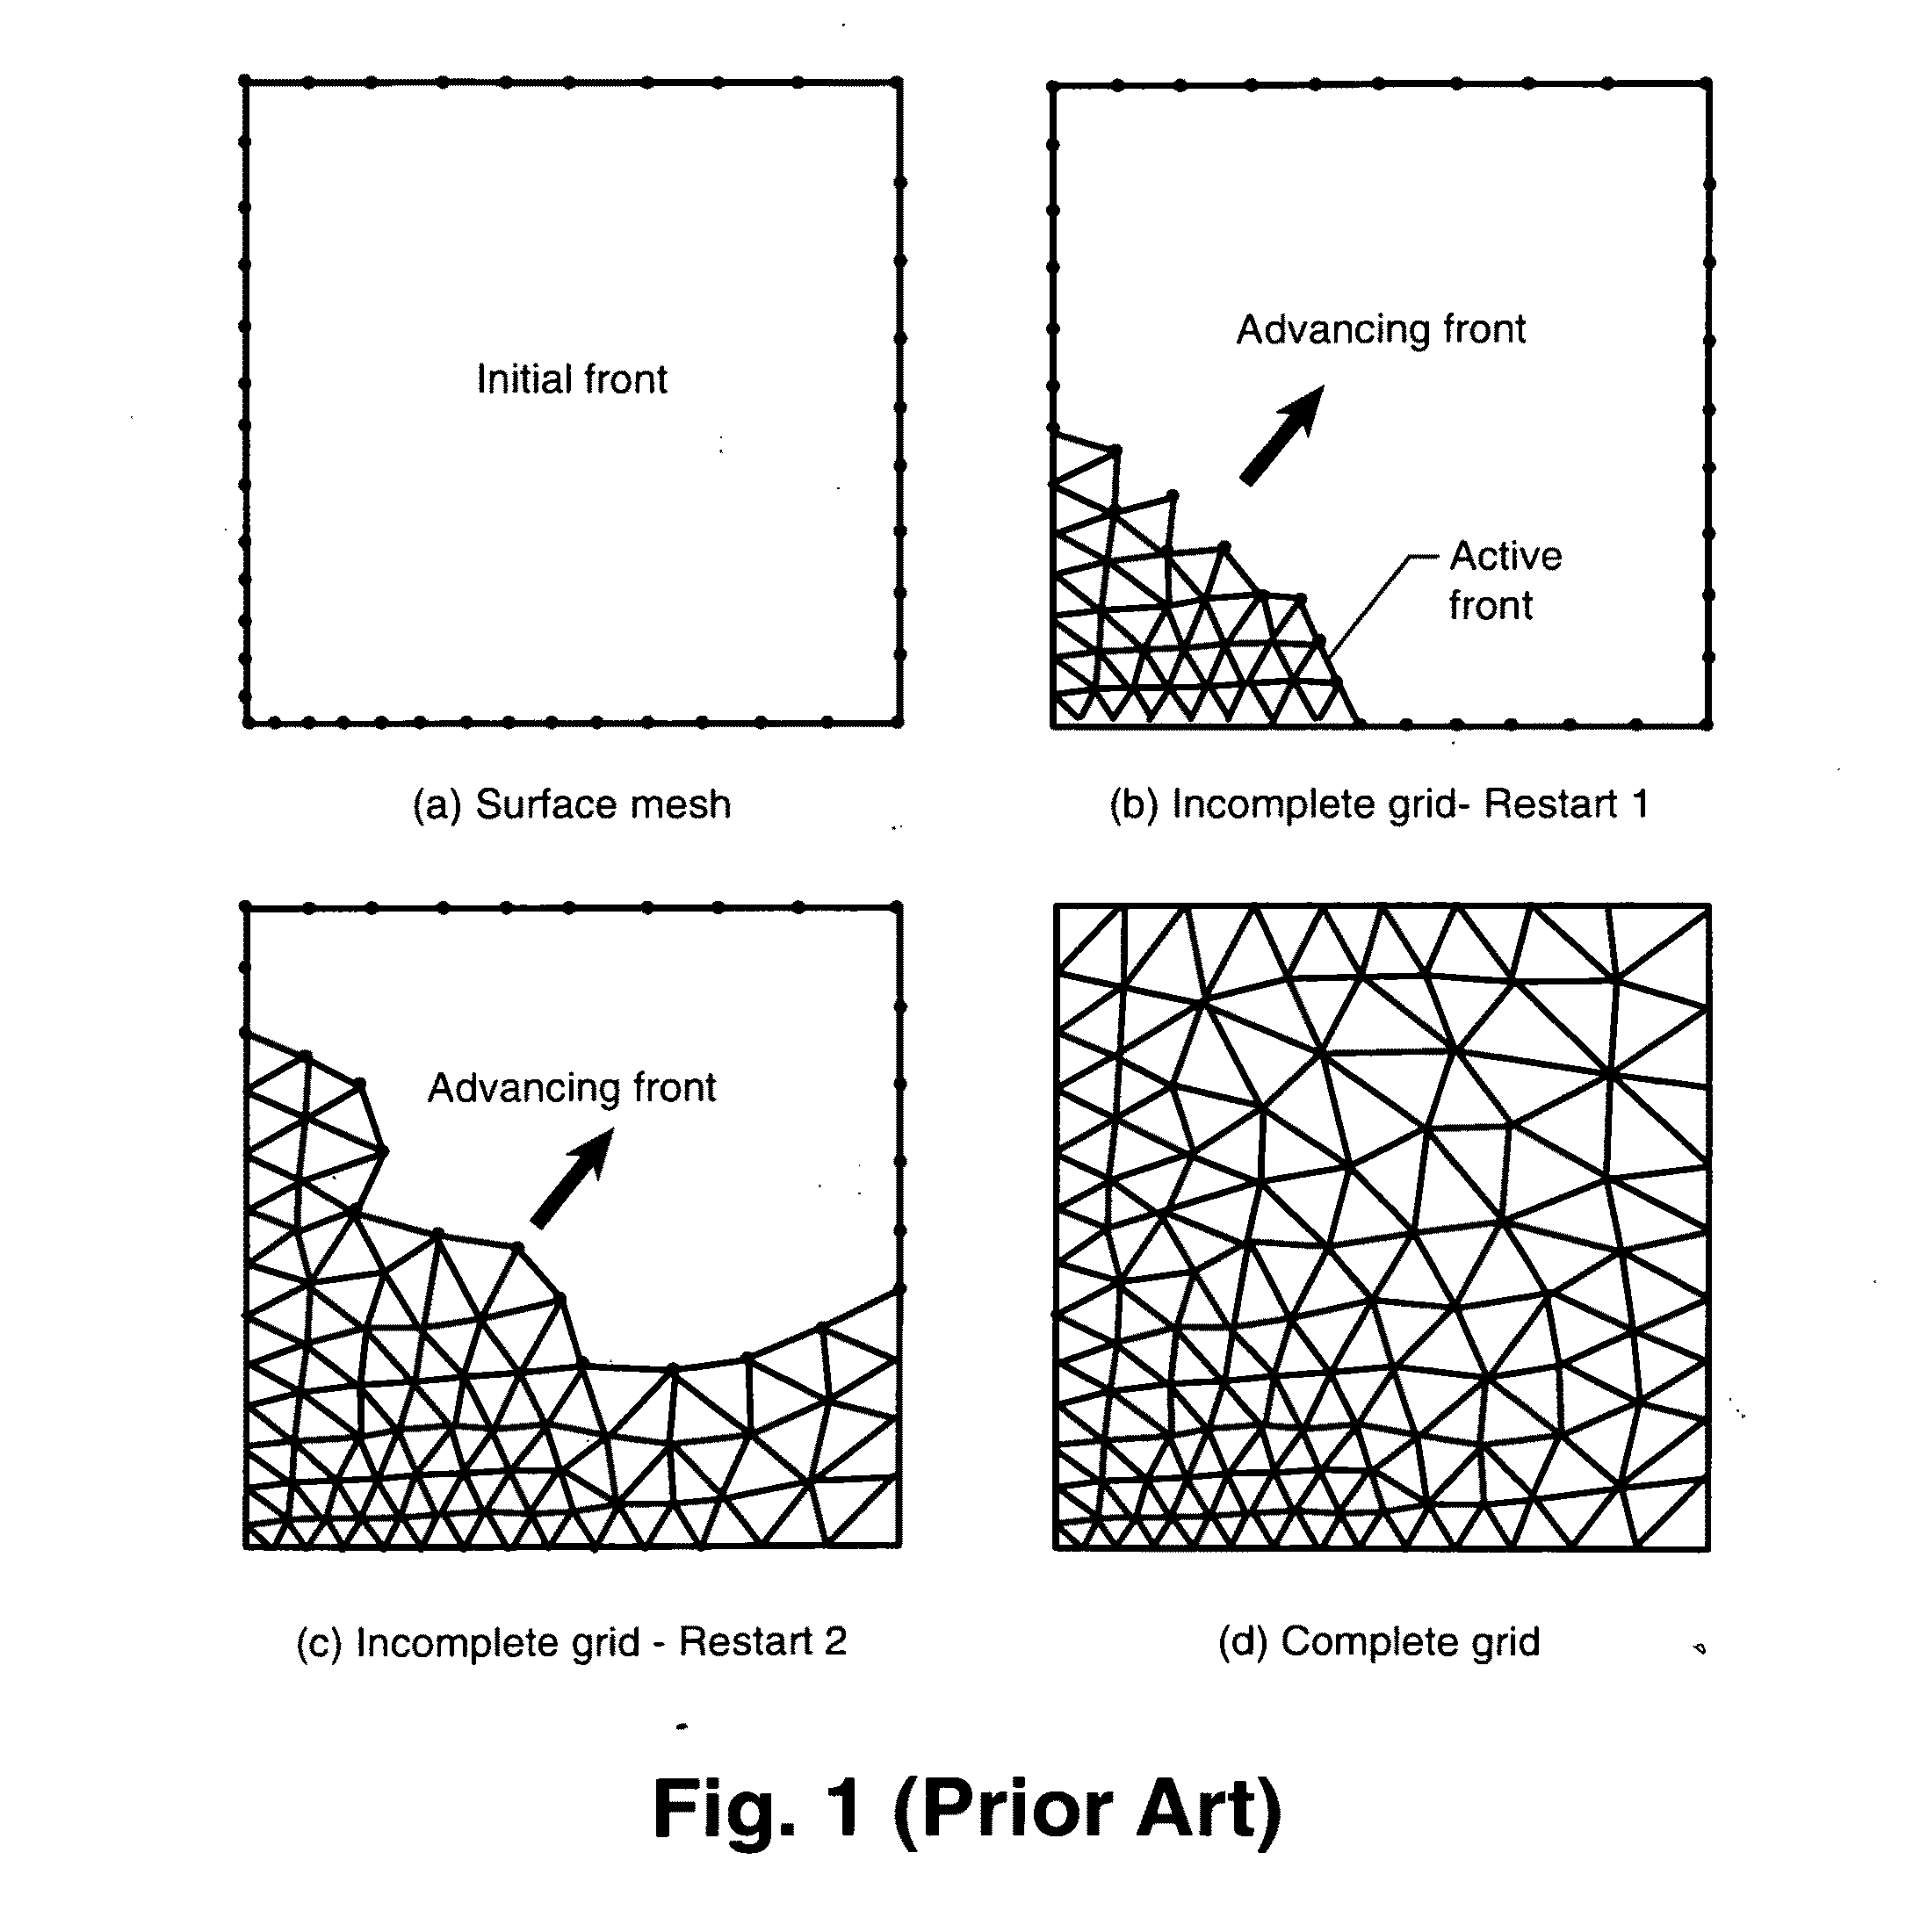 Domain Decomposition By the Advancing-Partition Method for Parallel Unstructured Grid Generation